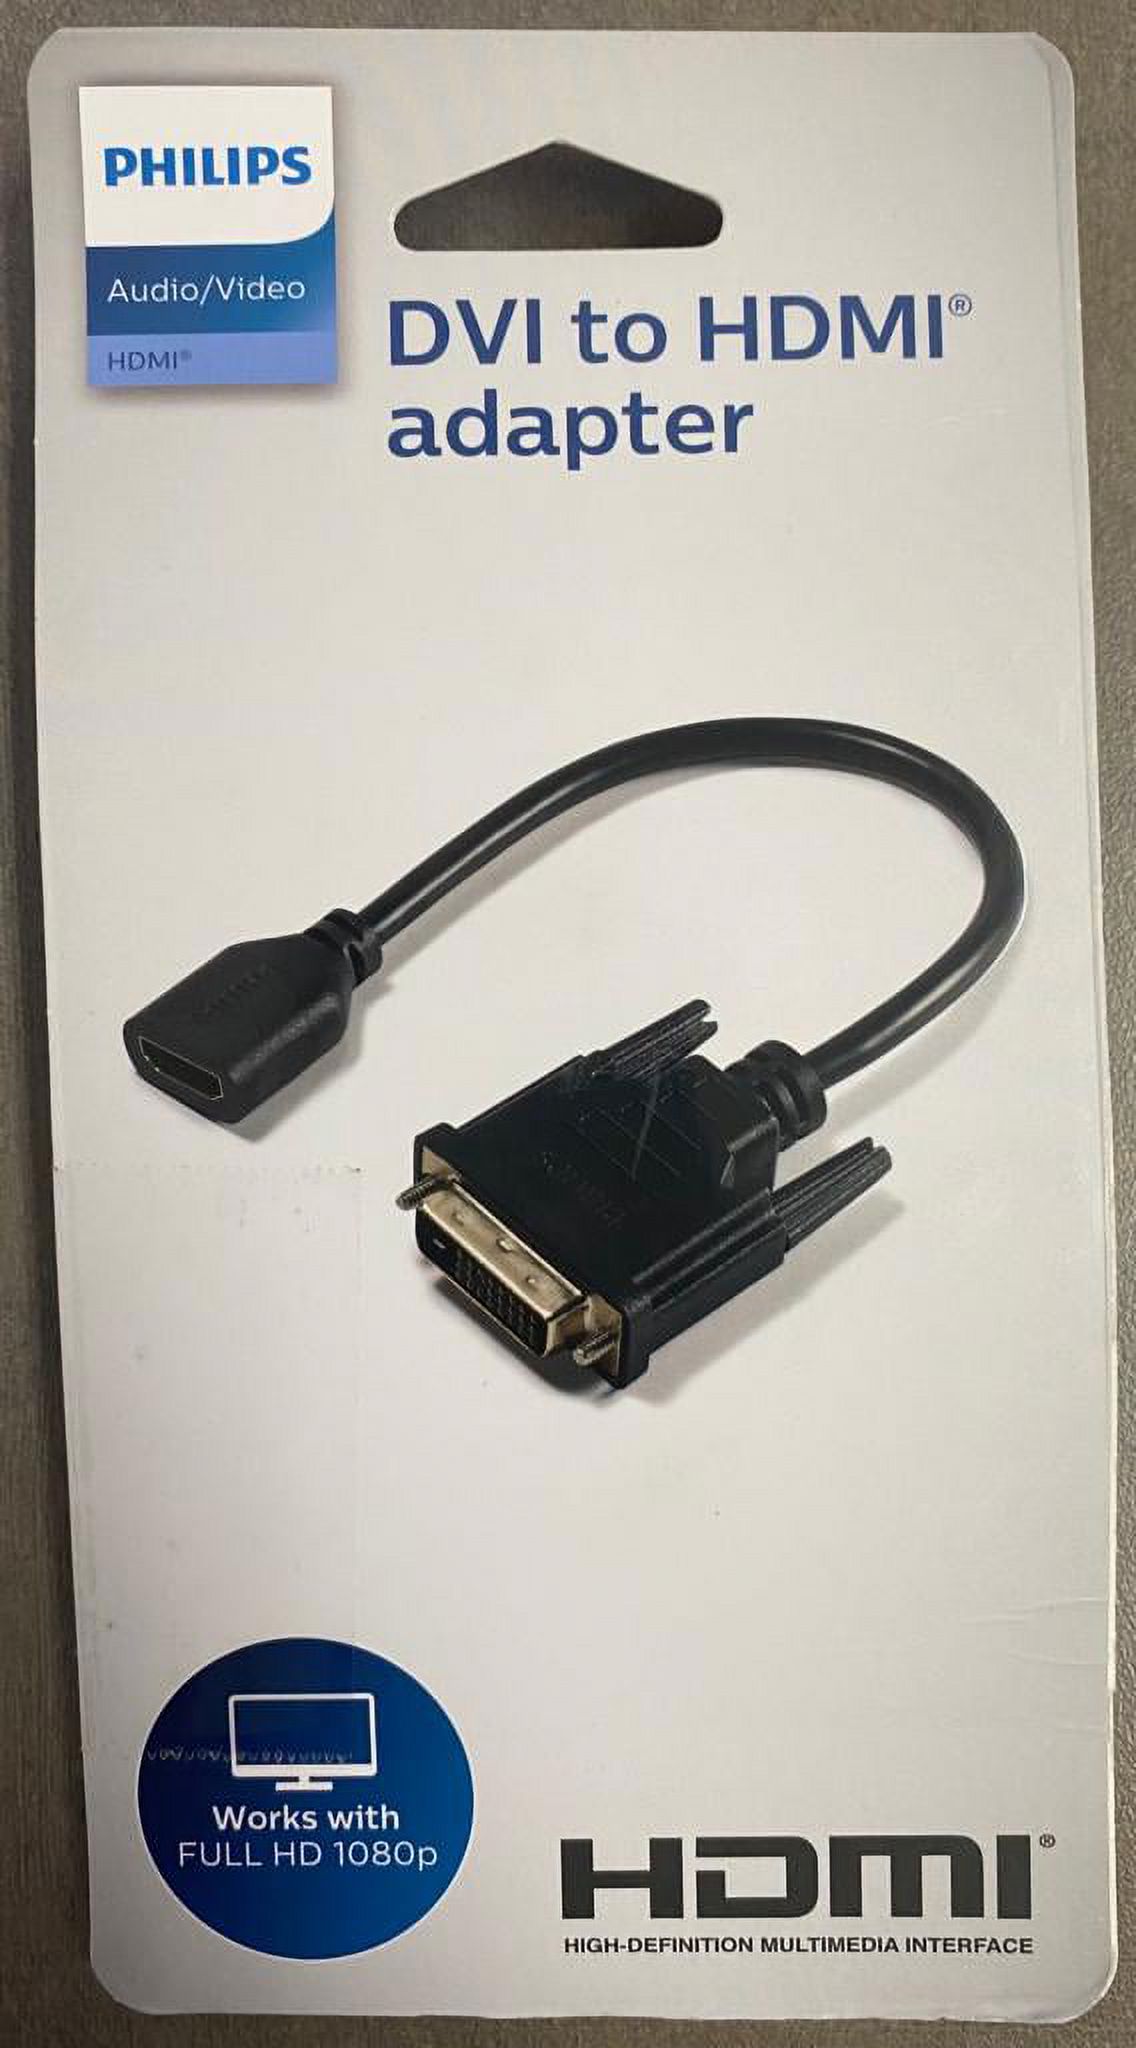 Philips DVI to HDMI Pigtail Adapter, Black, SWV9200H/27 - image 3 of 3